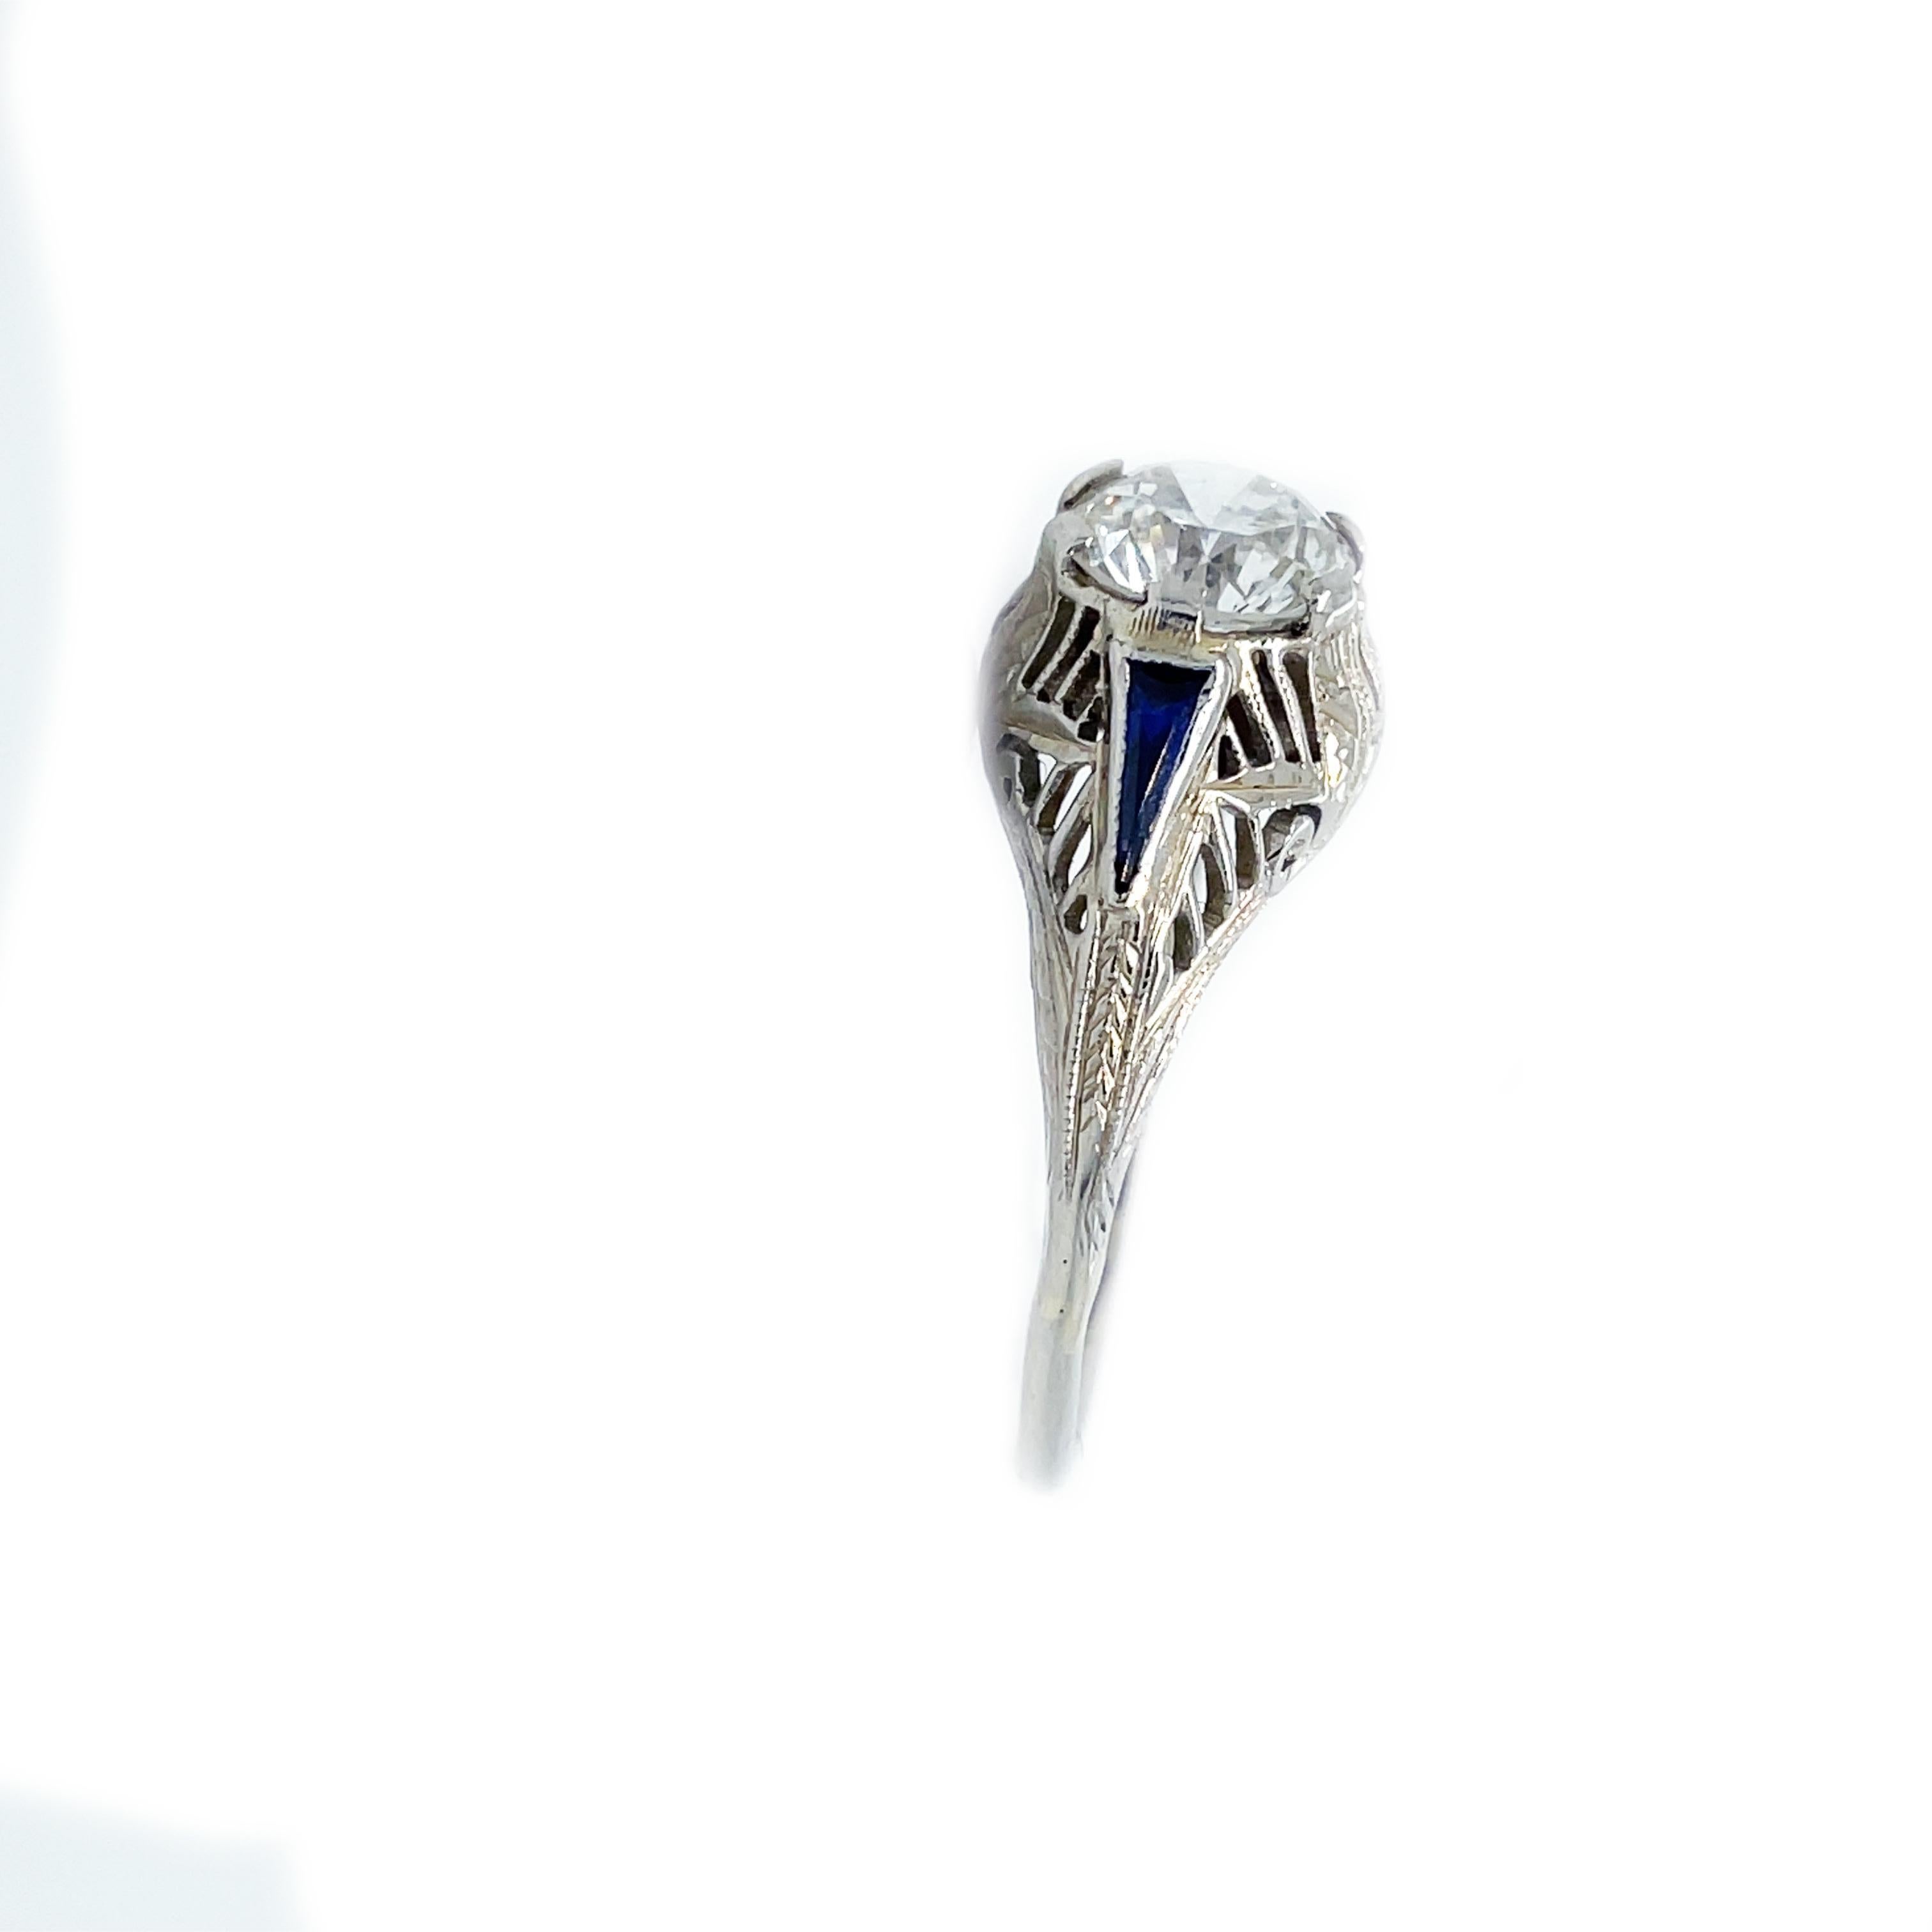 1925 Art Deco Diamond and Sapphire White Gold Ring with AGS Report For Sale 2